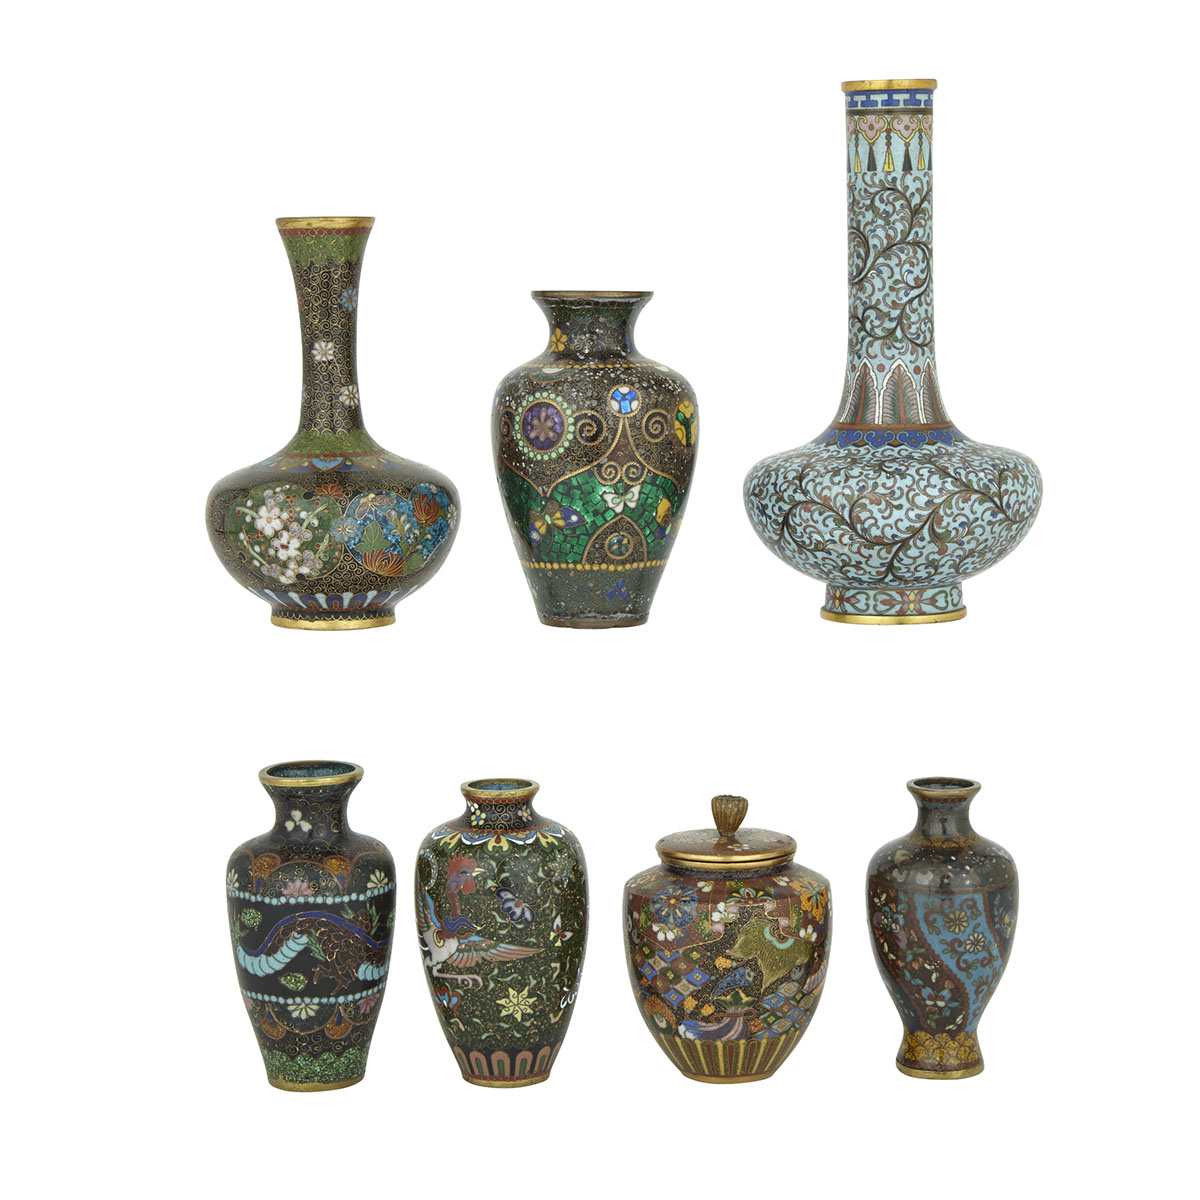 Group of Seven Japanese Cloisonné Vases, Early 20th Century